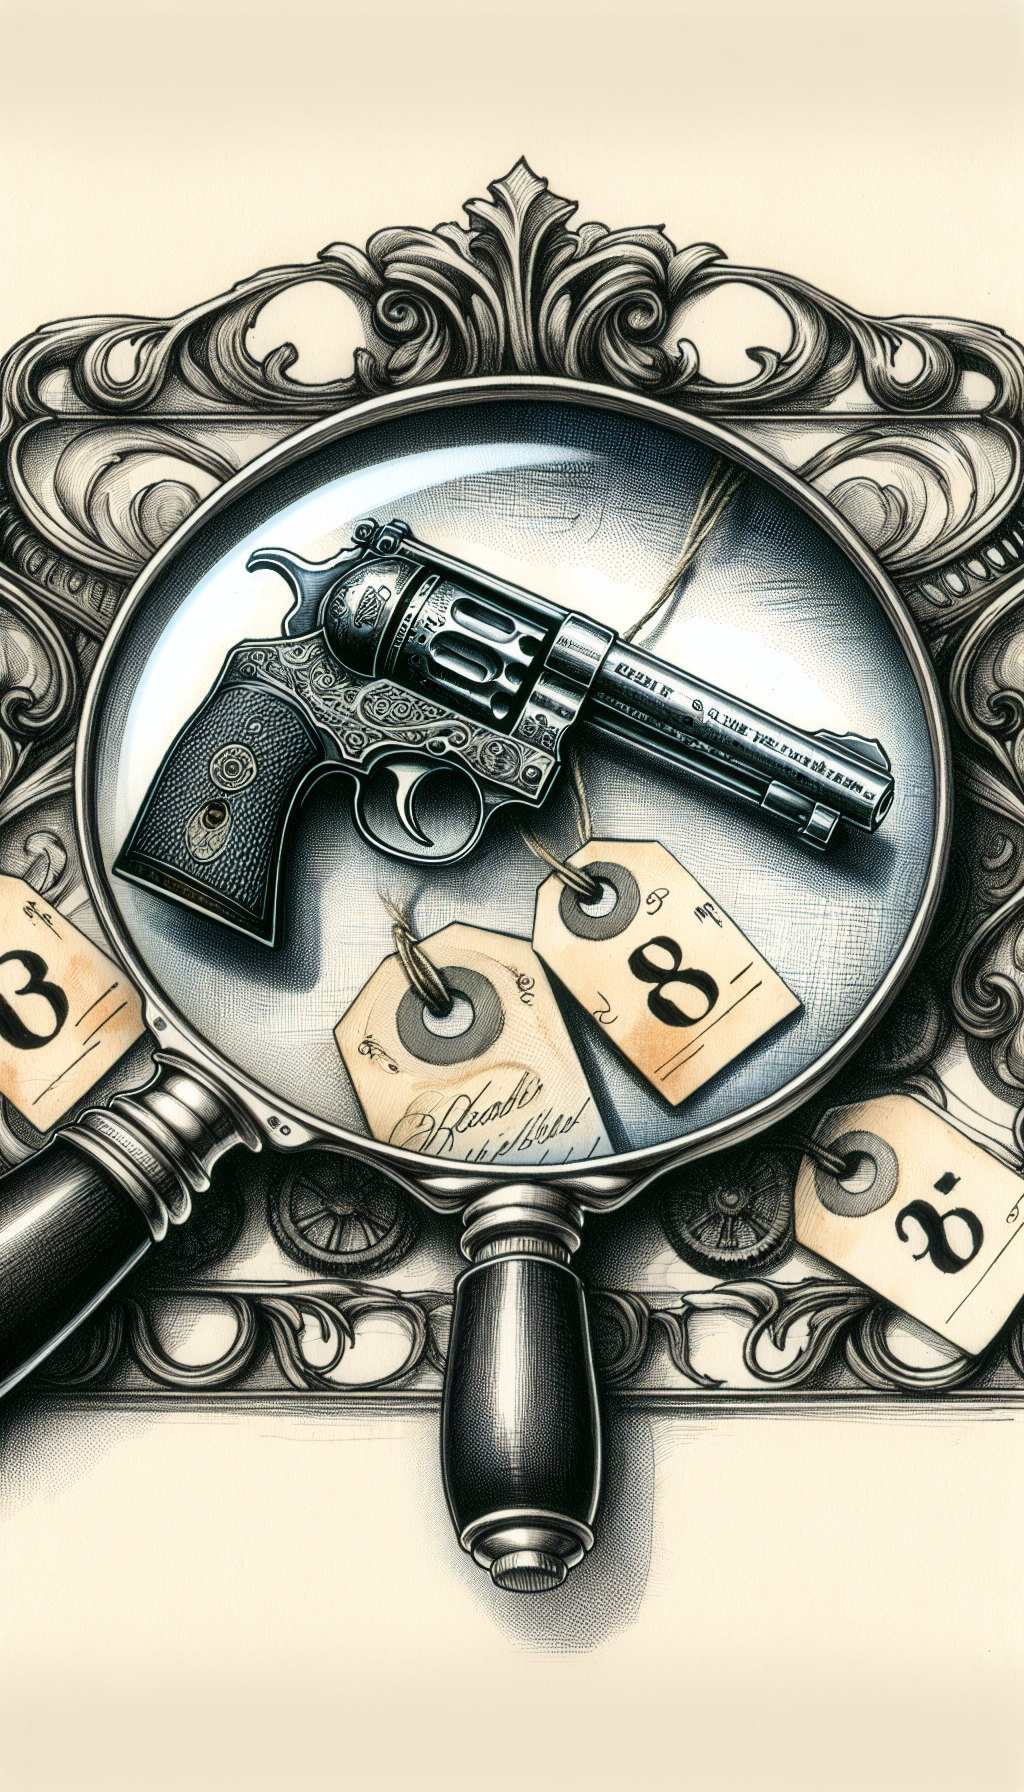 An antique revolver entwined with a magnifying glass that highlights intricate stamps and maker's marks on the barrel, while around it, delicate filigree forms price tags featuring values, blending Victorian etching with modern watercolor washes for a stark contrast between historical detail and contemporary assessment.